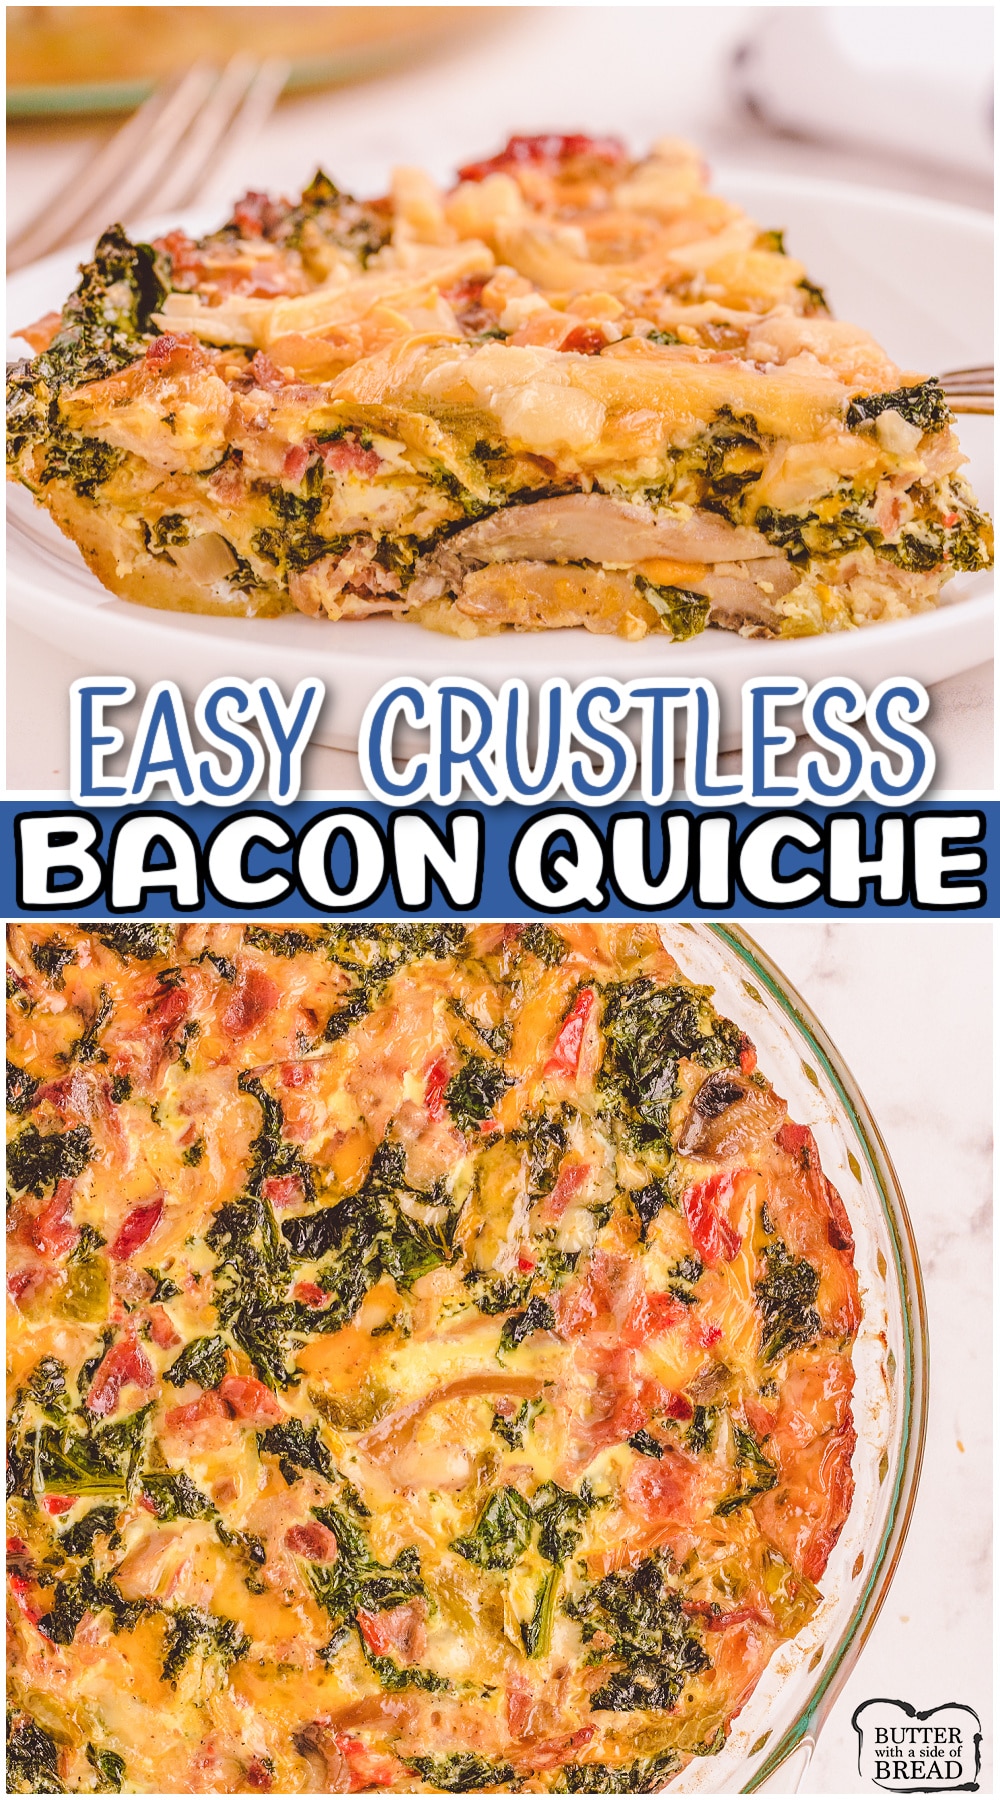 Easy Crustless Quiche made with bacon, cheese, eggs, peppers and kale! This easy quiche recipe makes for an incredible one-dish meal!